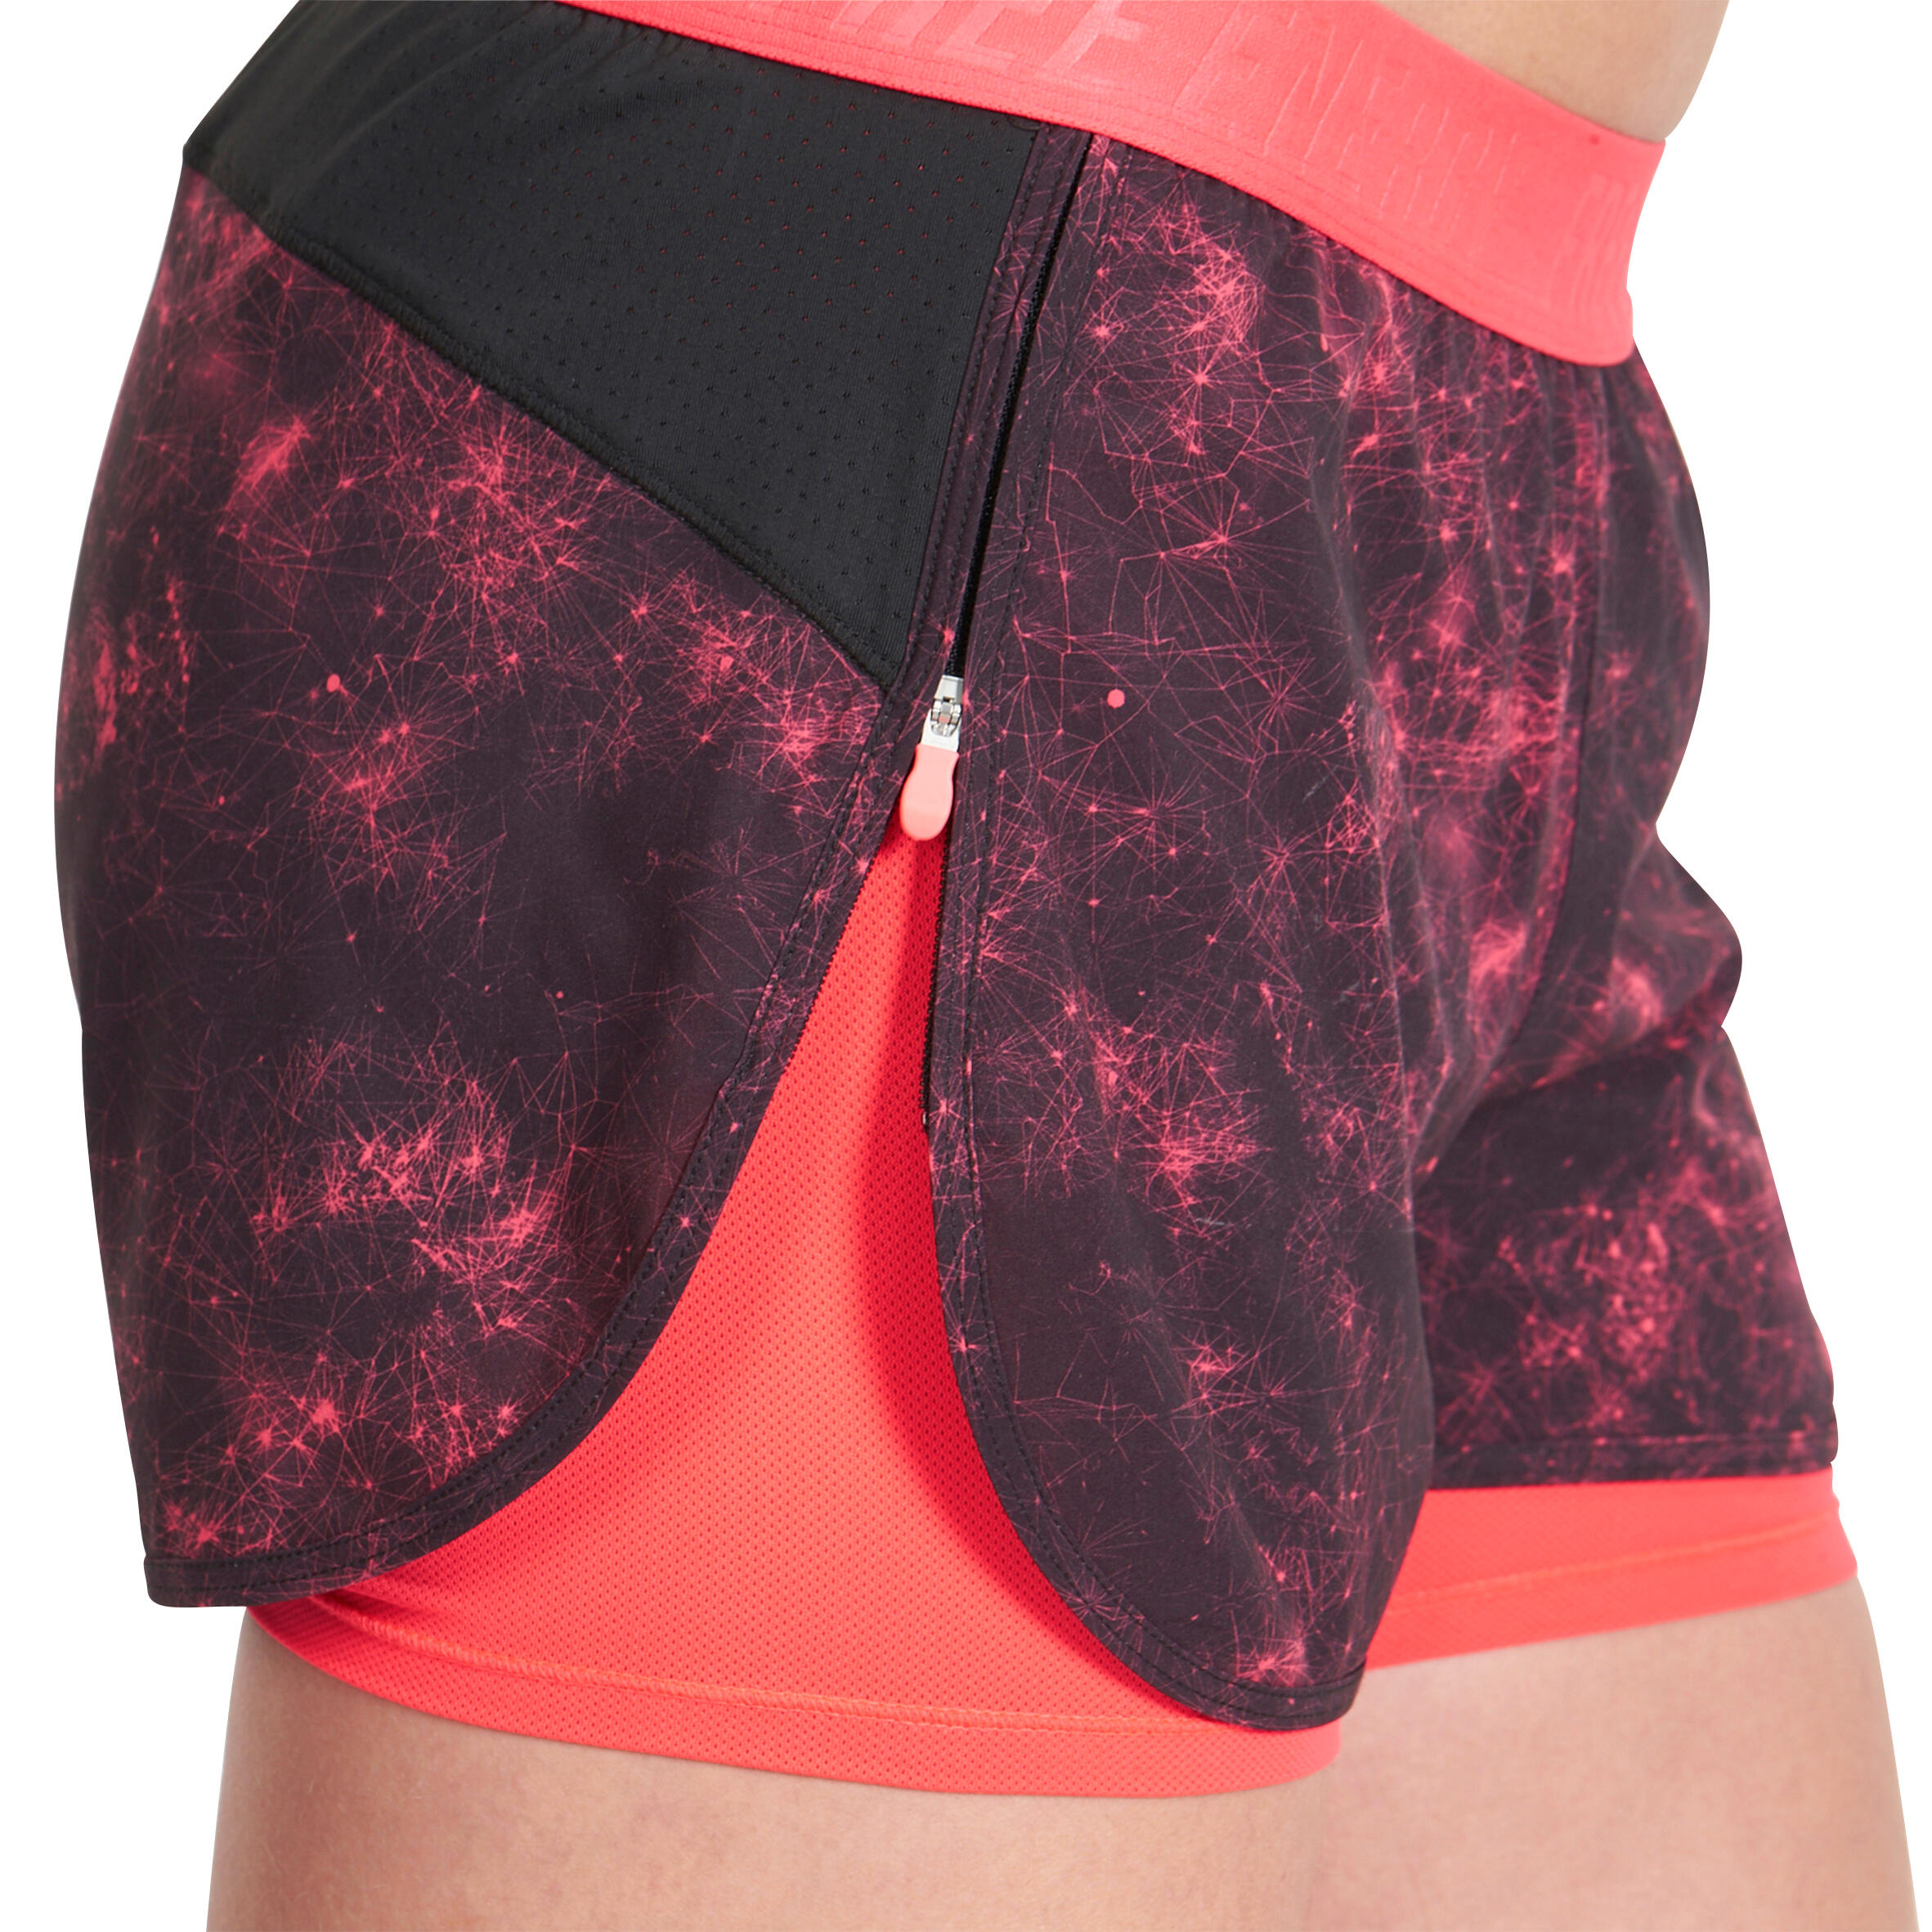 Energy Xtreme Women's 2-in-1 Fitness Shorts - Black/Pink Print 9/14